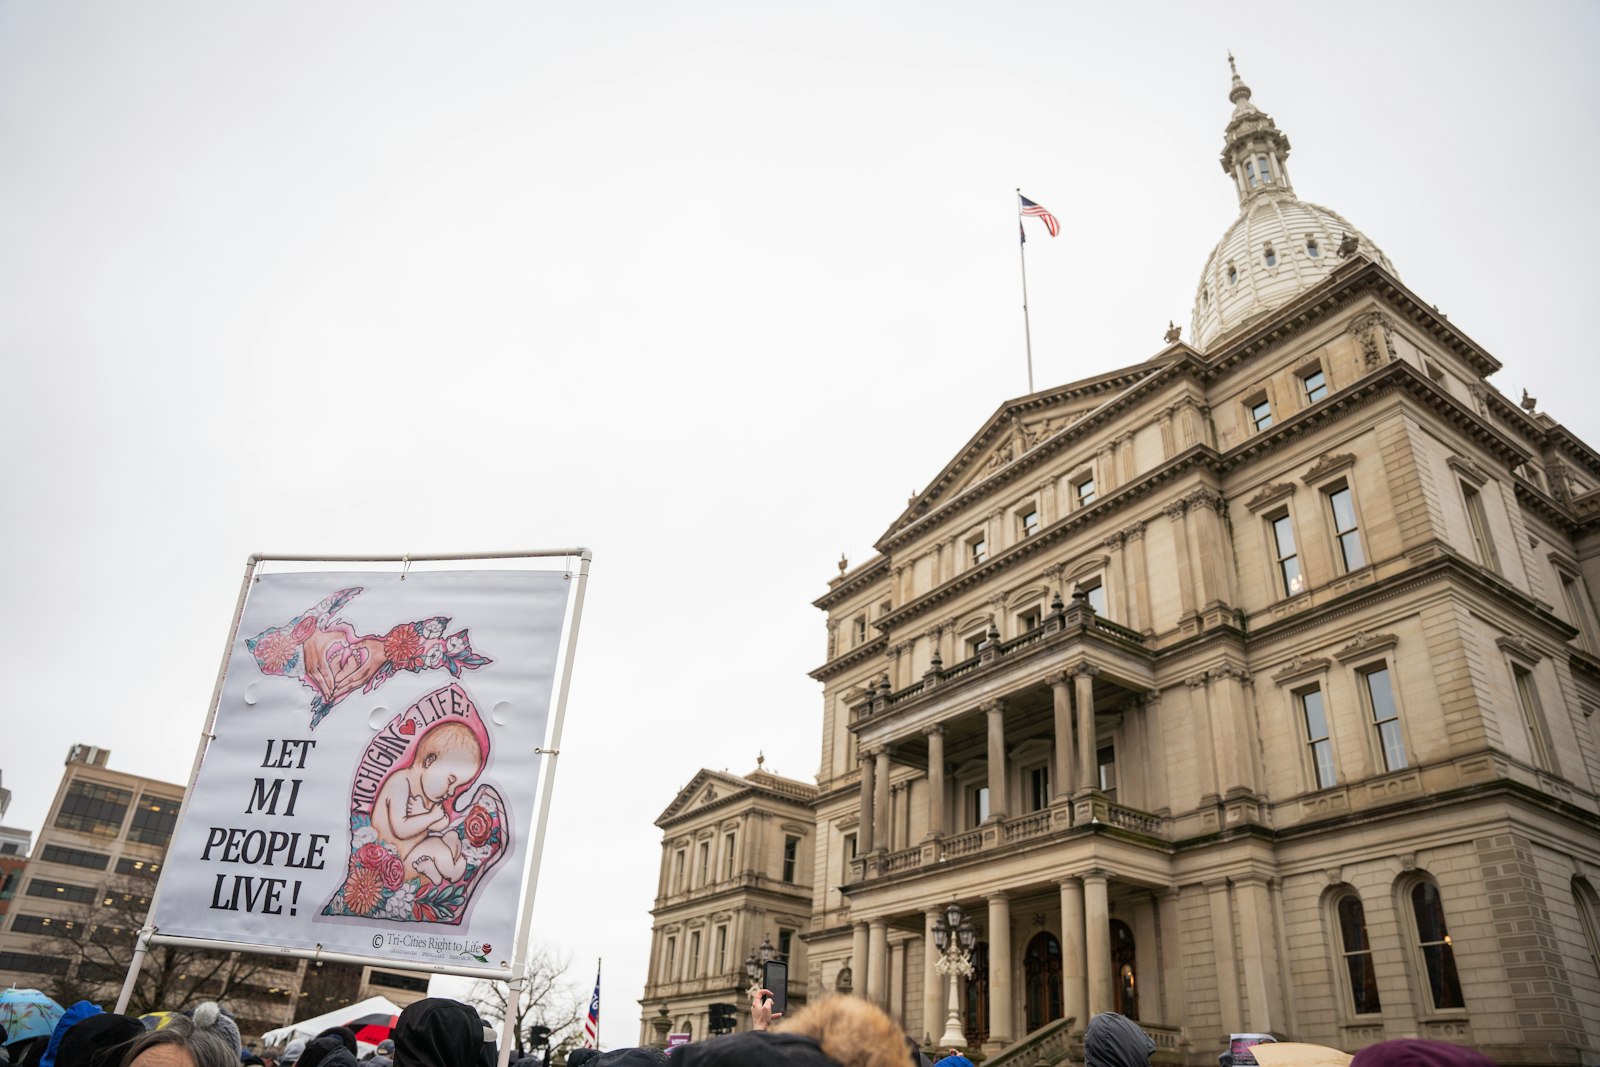 Pro-life supporters gathered from all corners of the state to make their voices heard, even as lawmakers in Michigan consider further legislation to deregulate abortion clinics, expand access to abortion and eliminate common-sense protections for women.